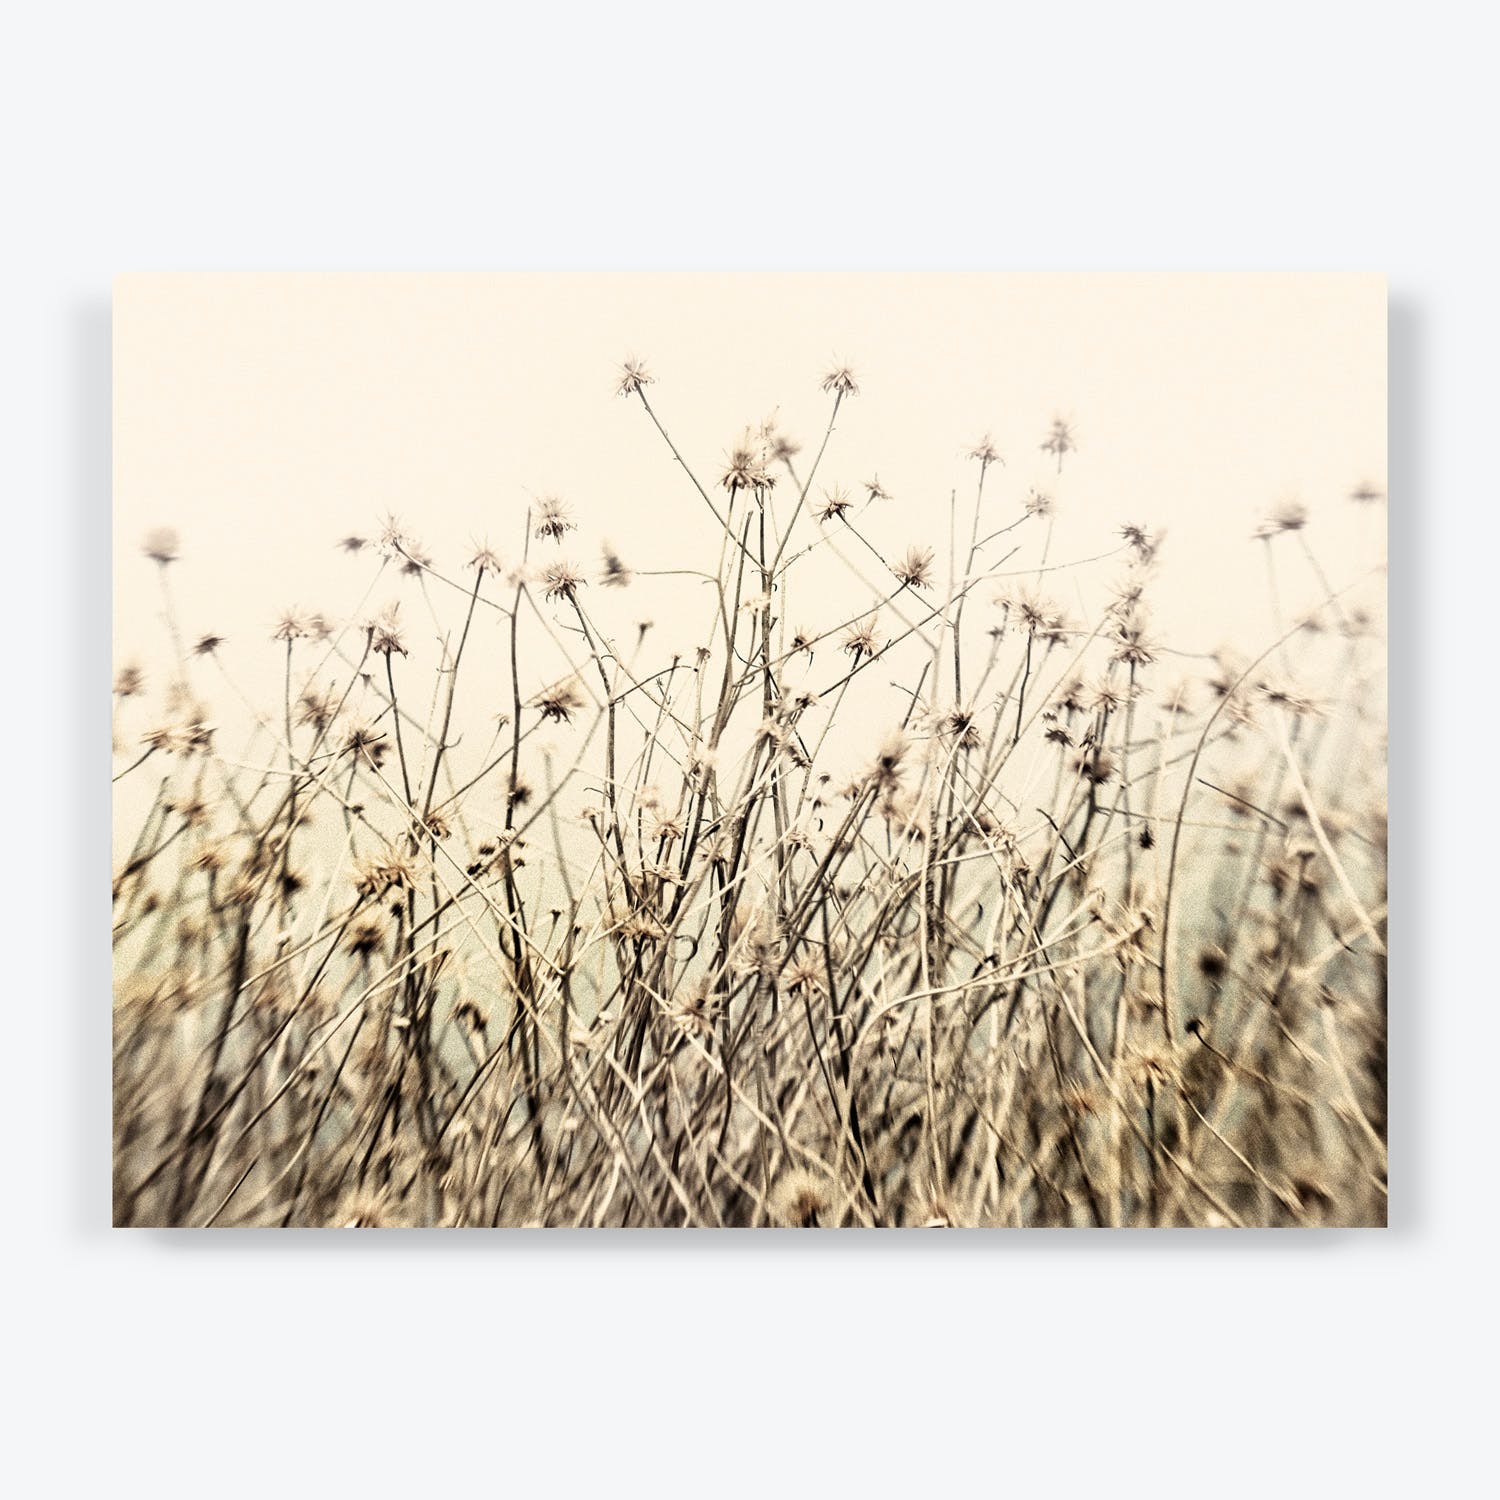 Dried seed heads of wild grasses catch the viewer's eye.